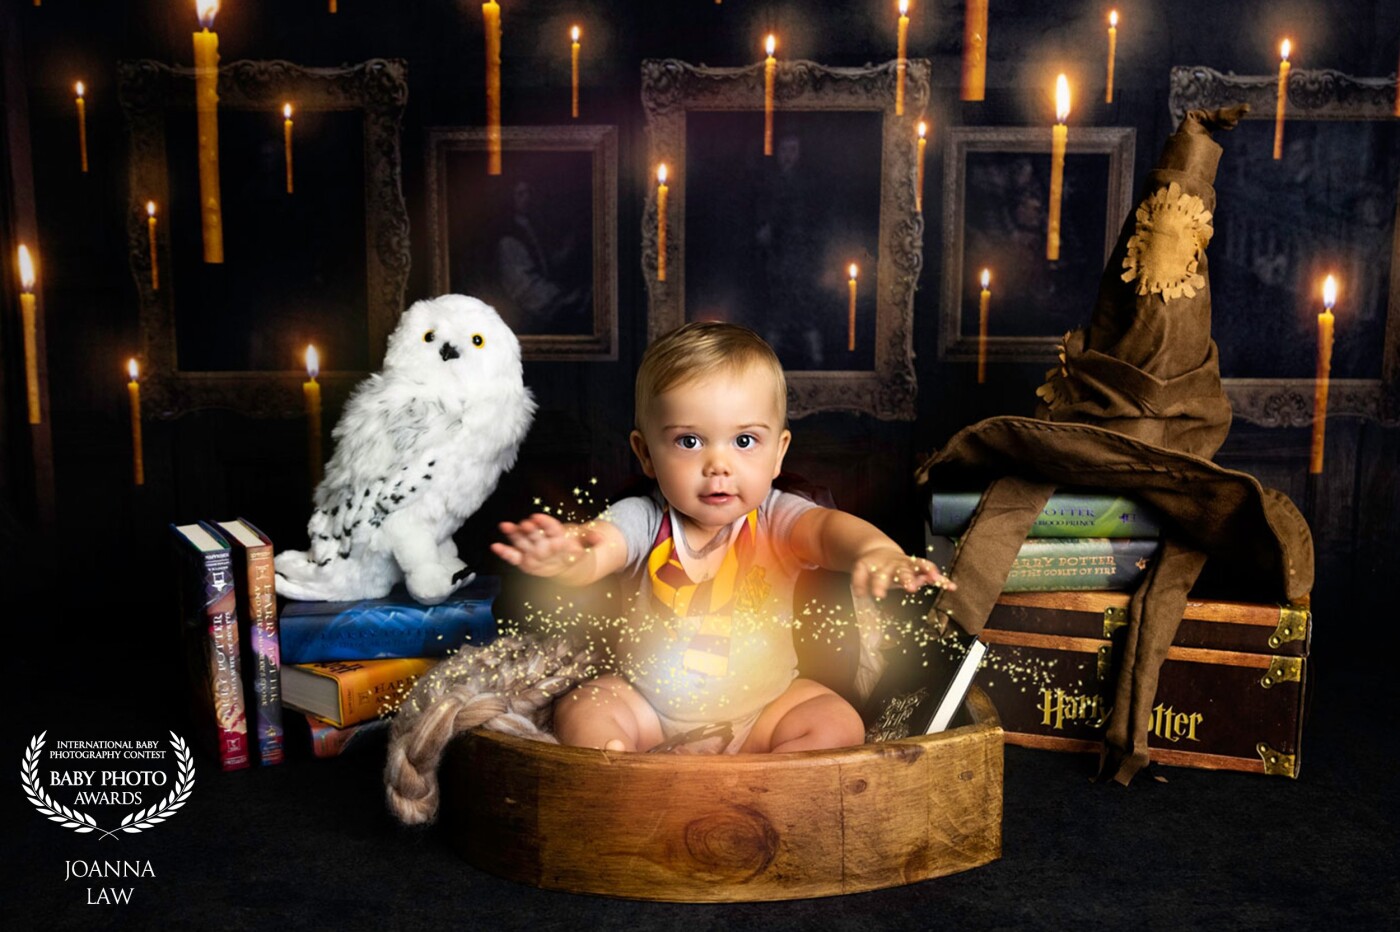 When Mama said she was a HUGE fan of Harry Potter and wanted something "magical" for her daughter's sitter session, we had to deliver!